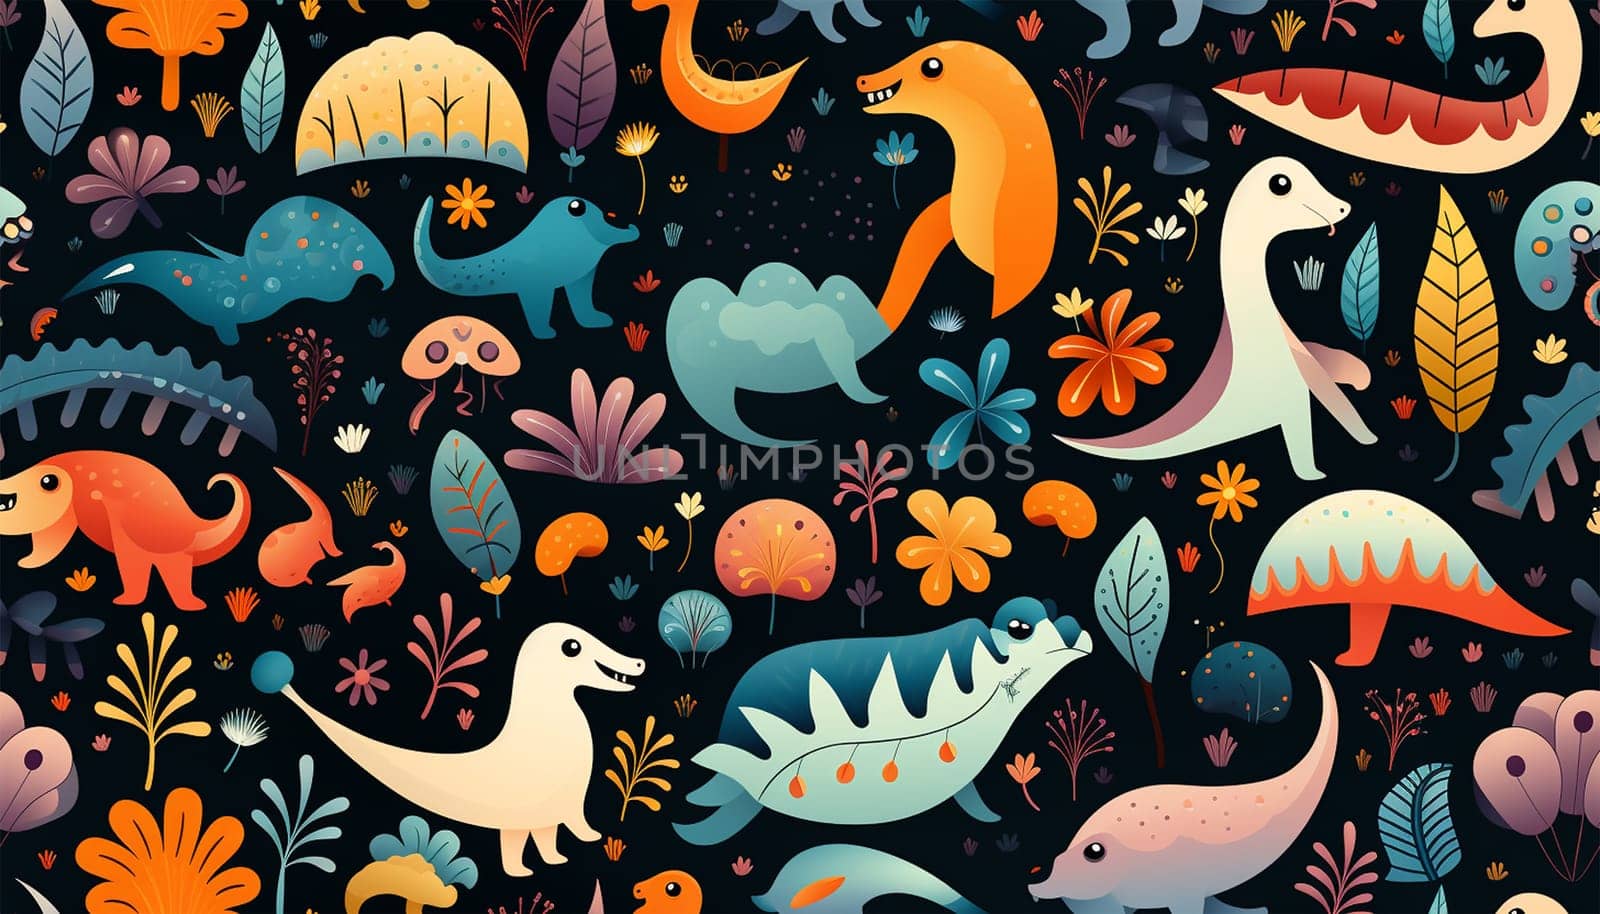 Adorable seamless pattern with funny dinosaurs in cartoon. Ideal for cards, invitations, party, banners, kindergarten, baby shower, preschool and children room decoration by Annebel146